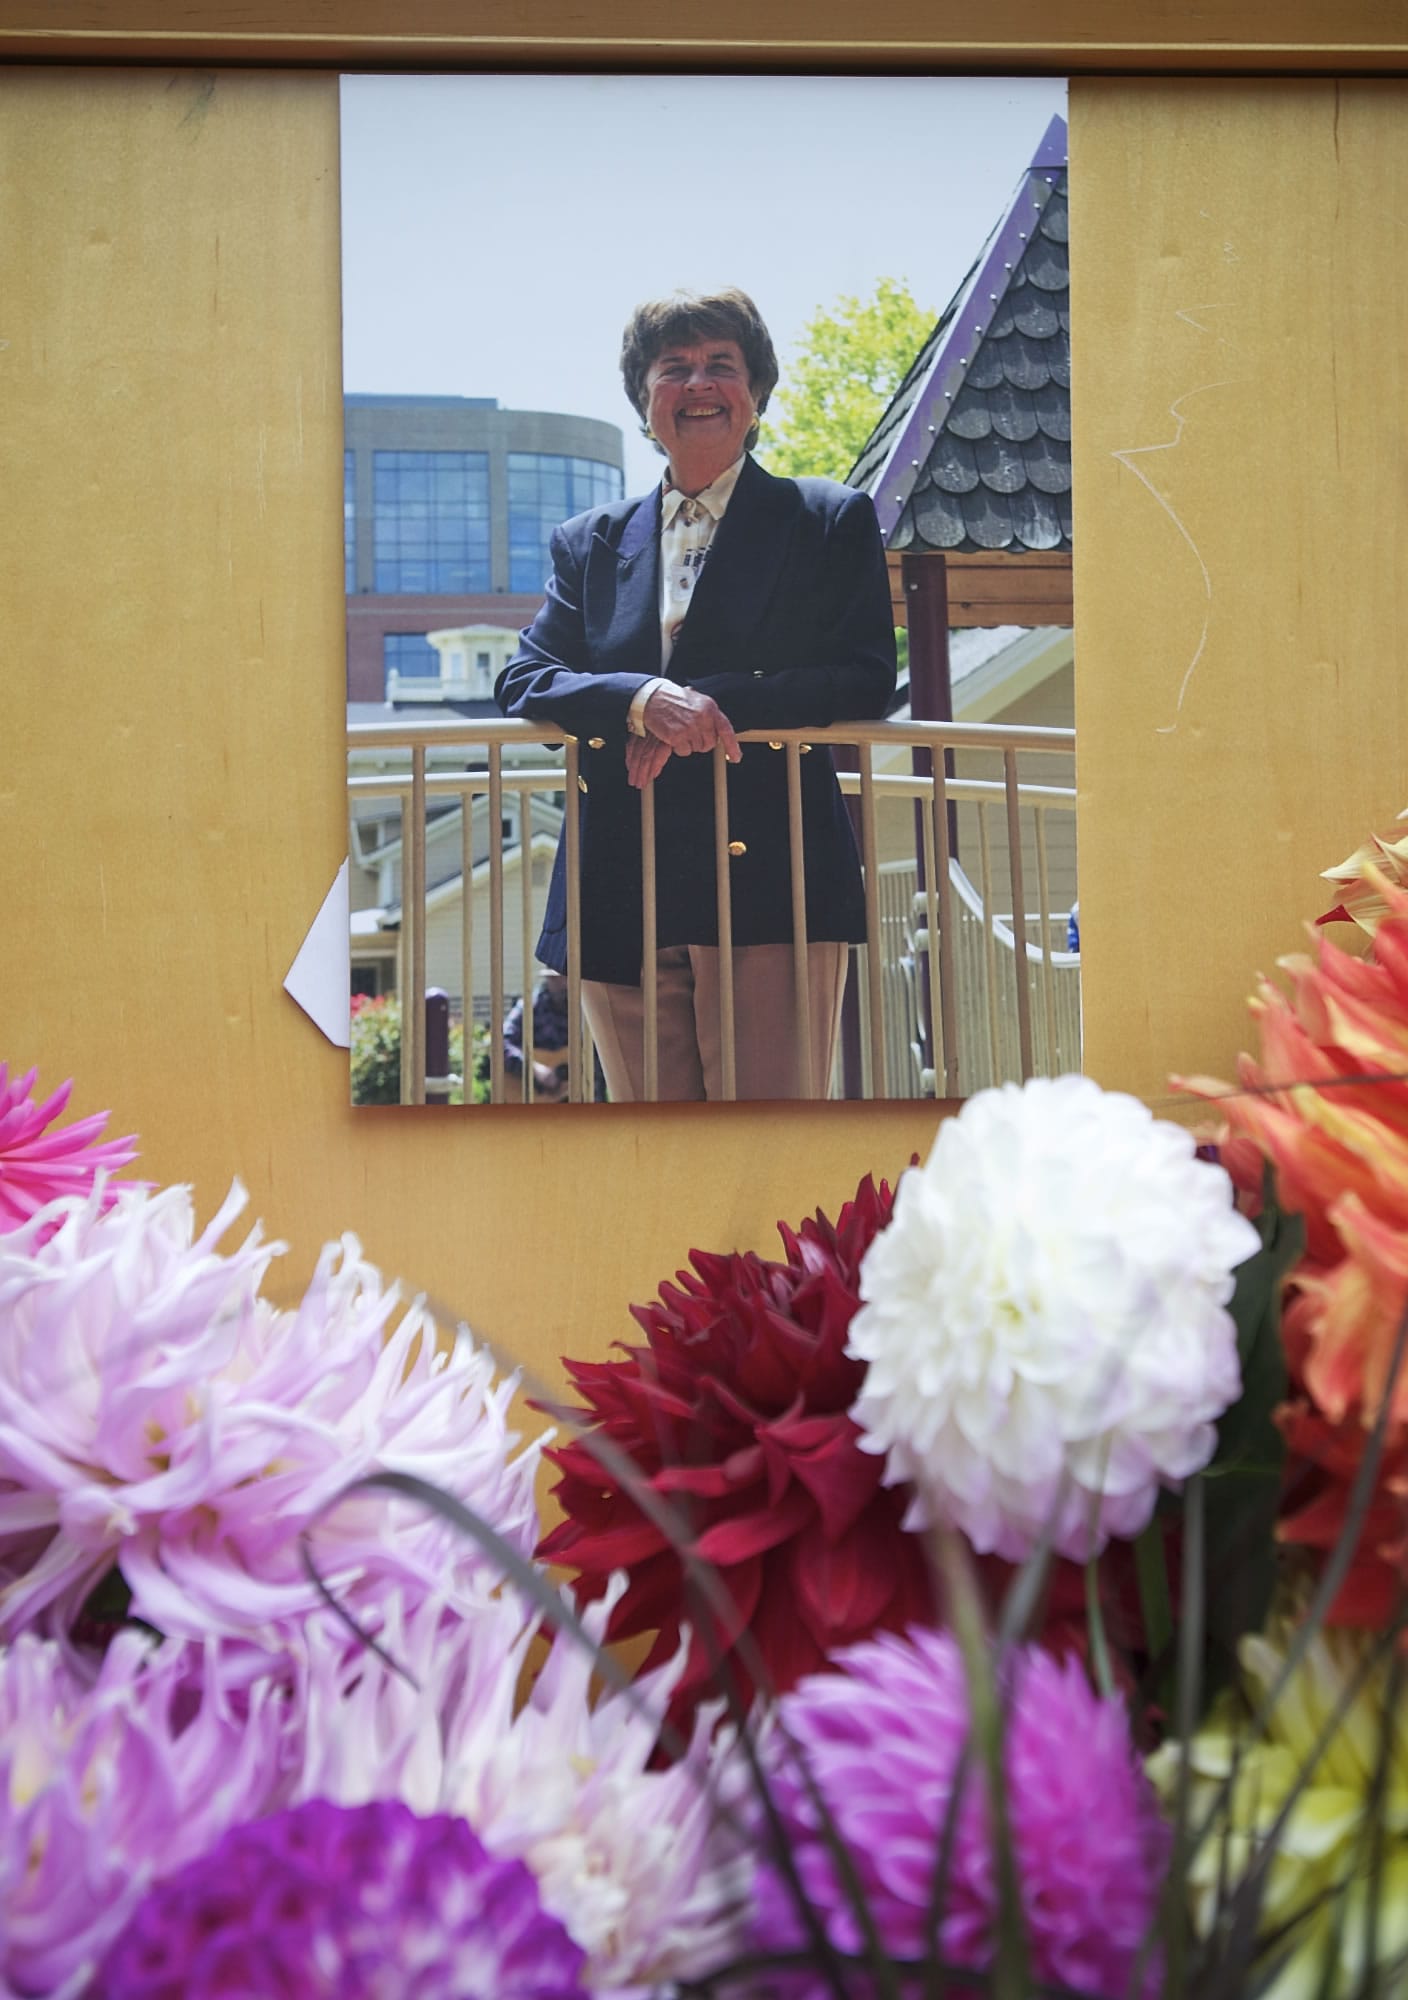 An image of Wager, known as Flossie, hung from the dais Sunday at a celebration of her life.